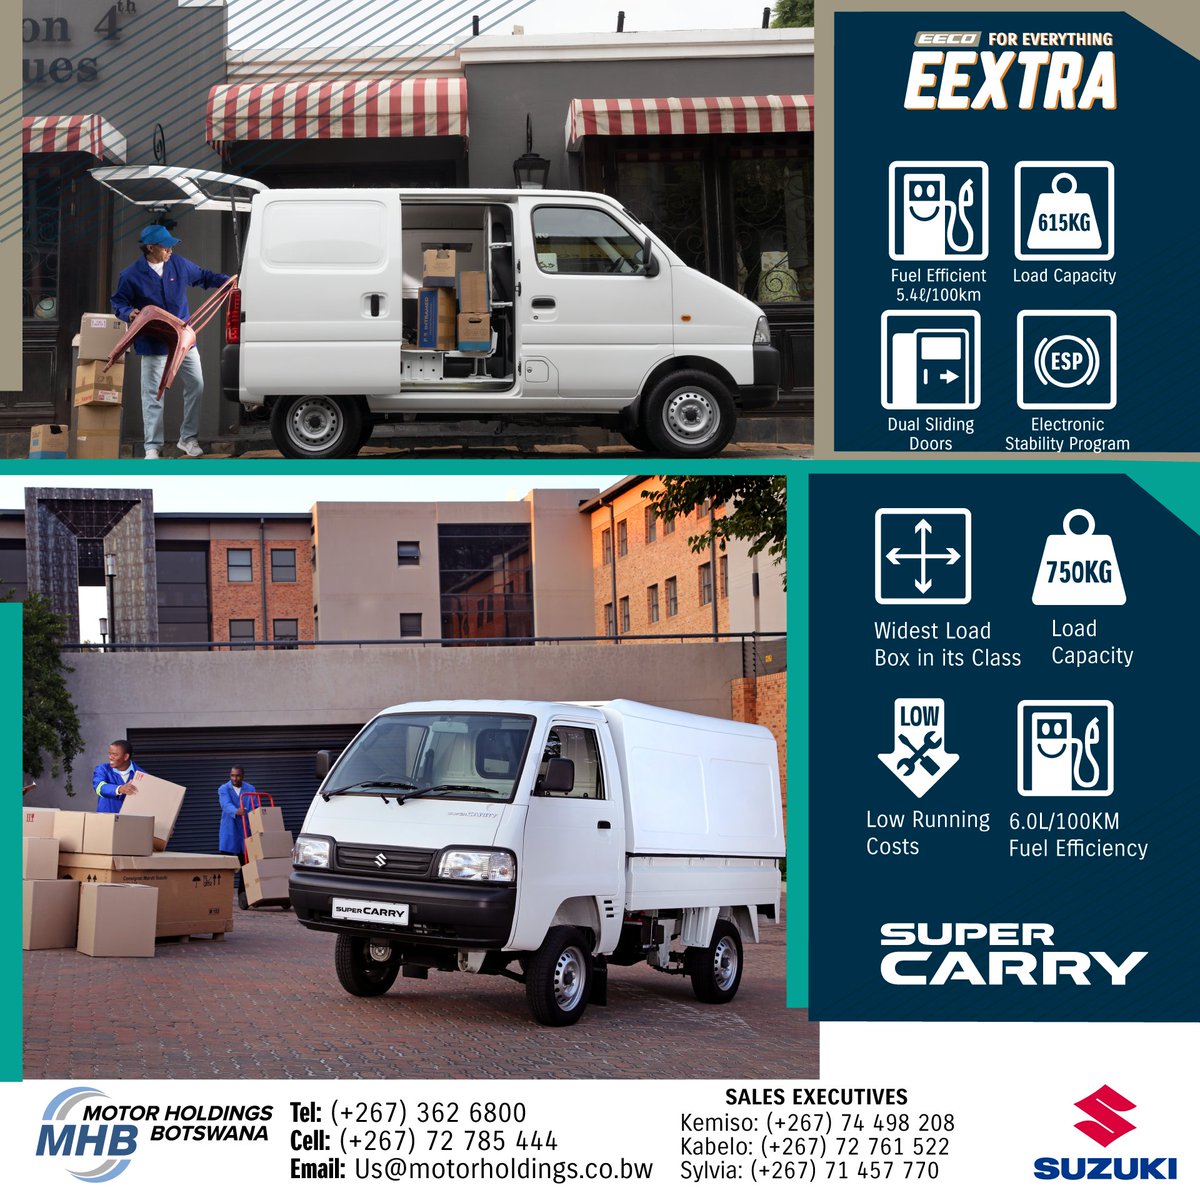 Between the Suzuki EECO and the Suzuki SUPER CARRY, which one will be your best companion? Share your comment below.
#suzuki #suzukigaborone #suzukisupercarry #supercarry #suzukieeco #eeco #motorholdingsbotswana